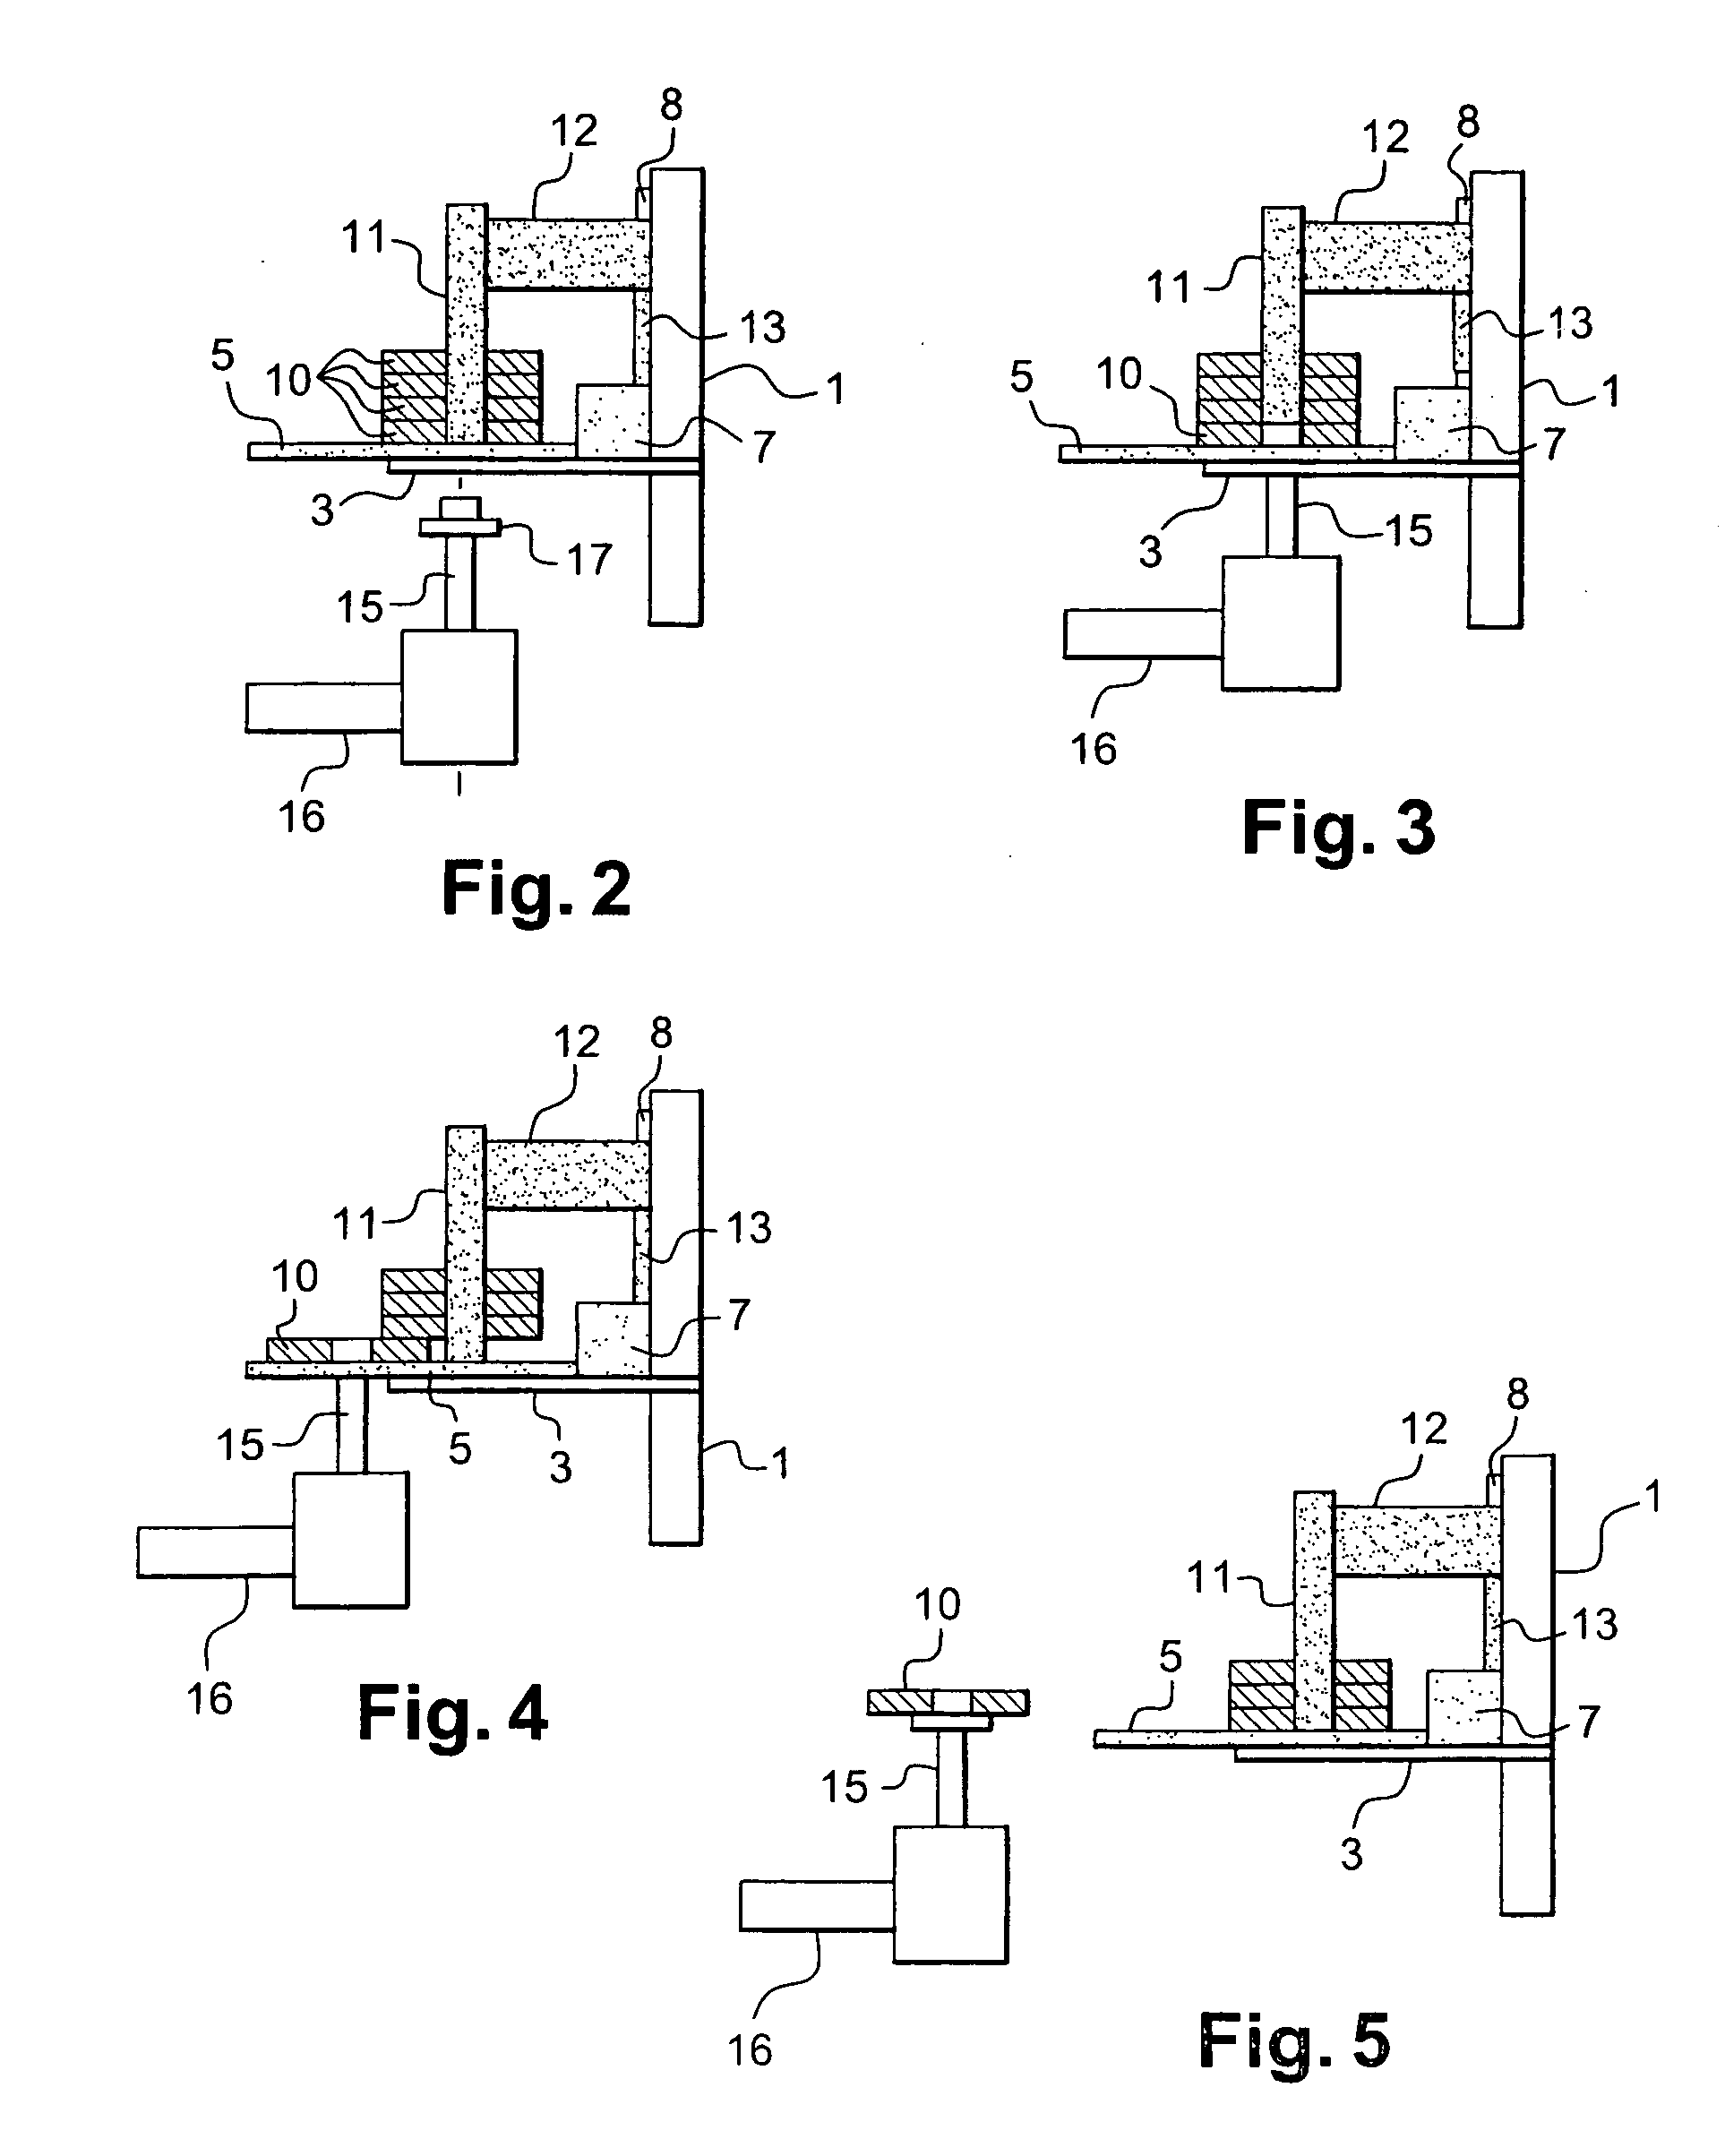 Device for automatically mounting and dismantling tools on a robot